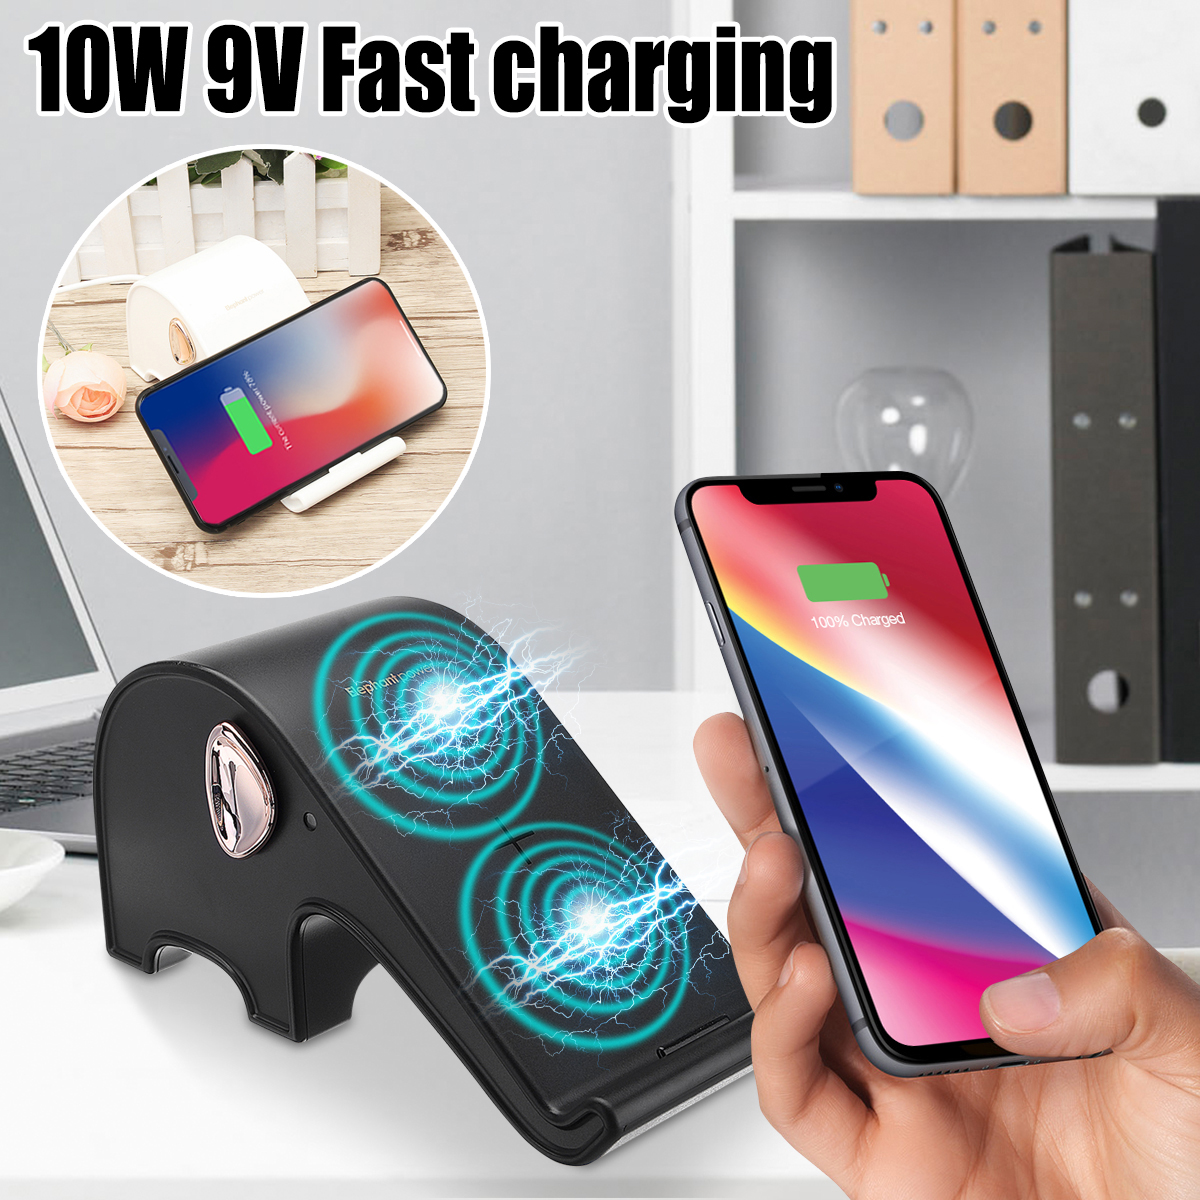 Bakeey-10W-QI-Fast-Wireless-Charger-Fast-Charging-Pad-For-iPhone-X-88Plus-Samsung-S8-S7-S6-1316595-1